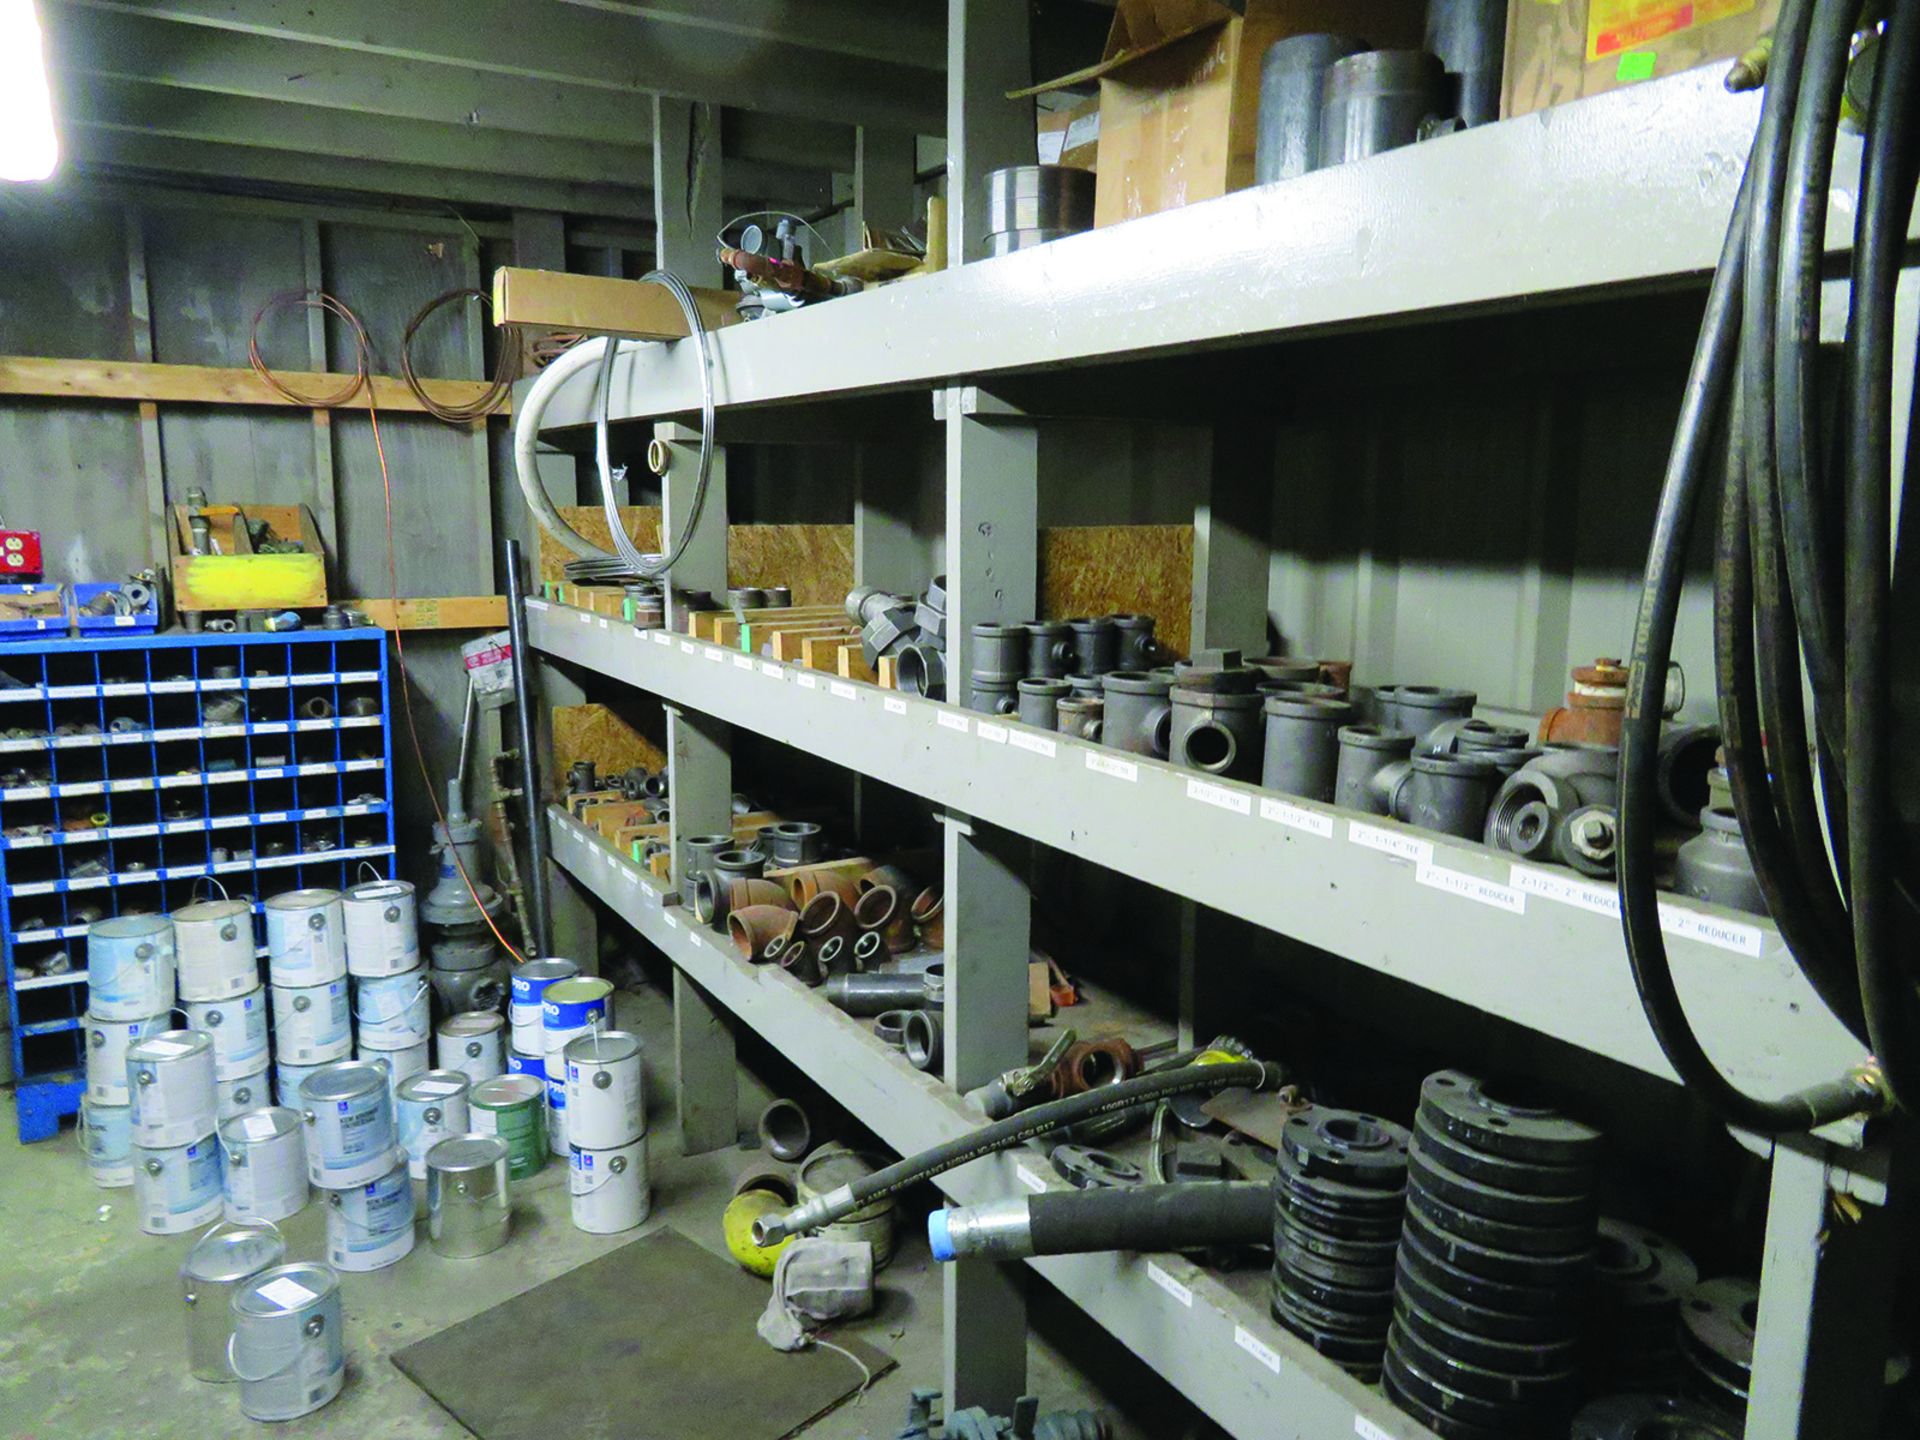 LOT: CONTENTS OF STORAGE ROOM INCLUDING PIPE FITTINGS, VALVES, FLANGES, ETC. - Image 2 of 2